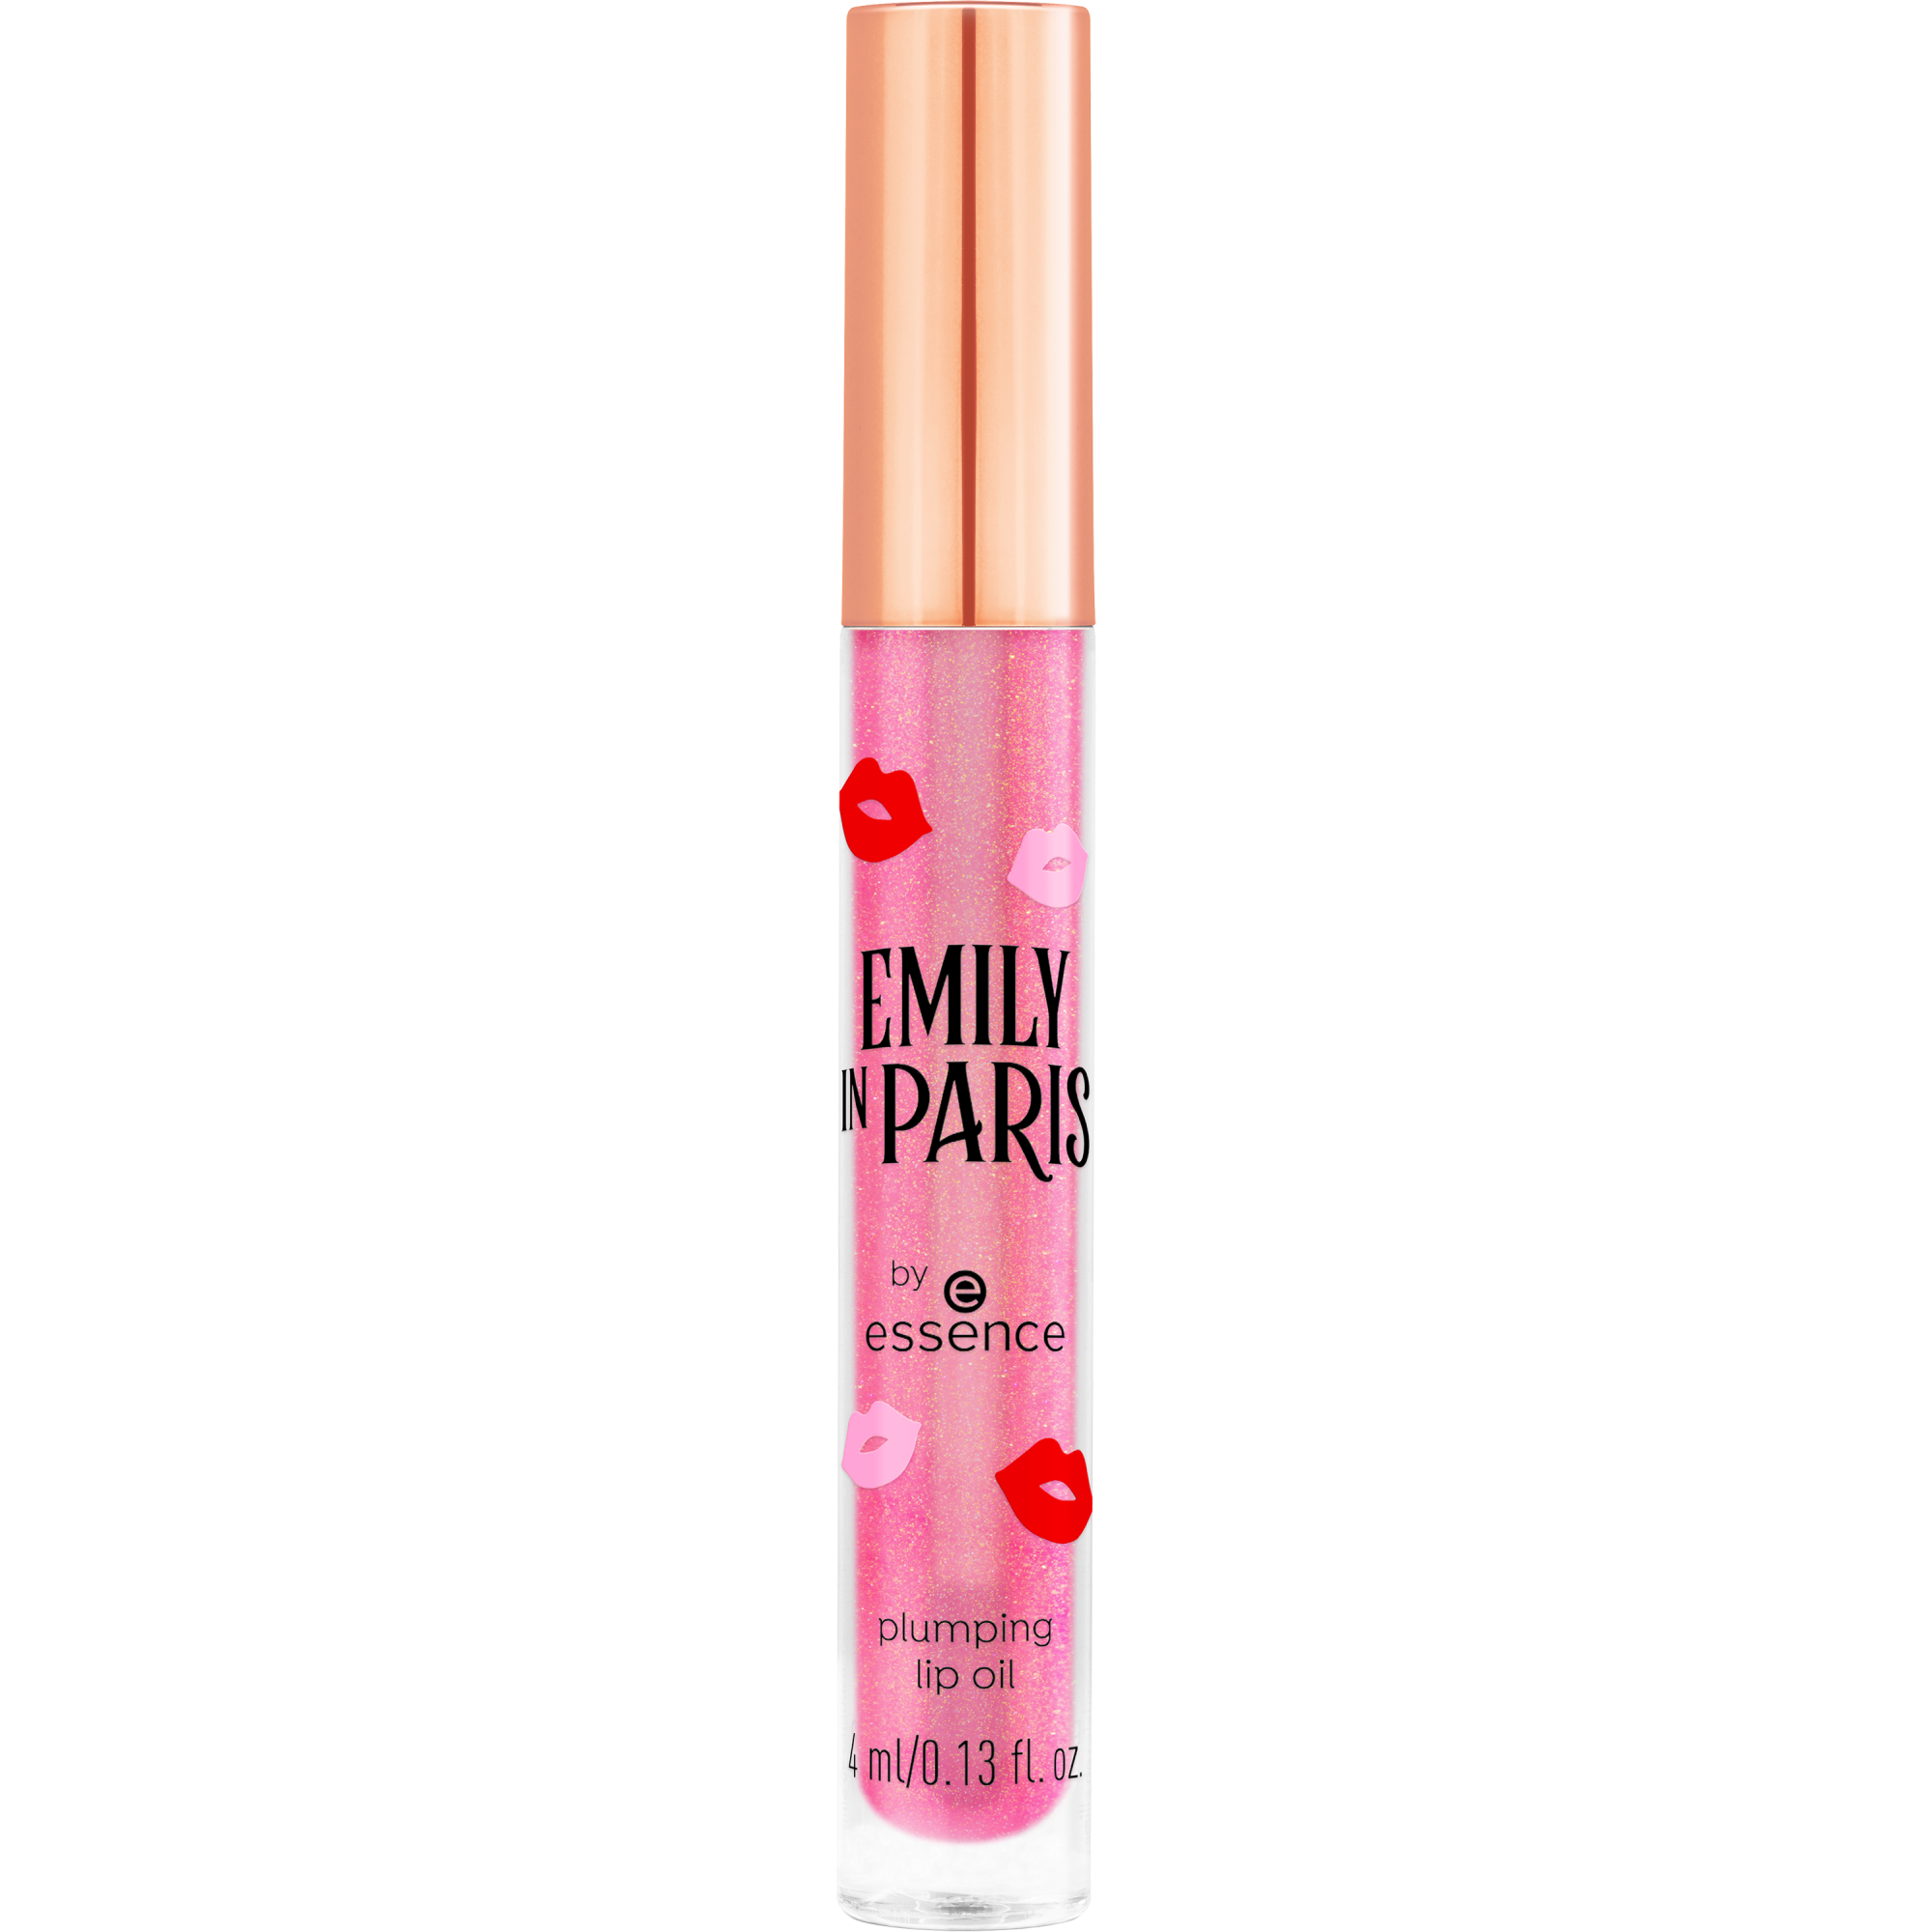 essence EMILY IN PARIS by essence plumping lip oil